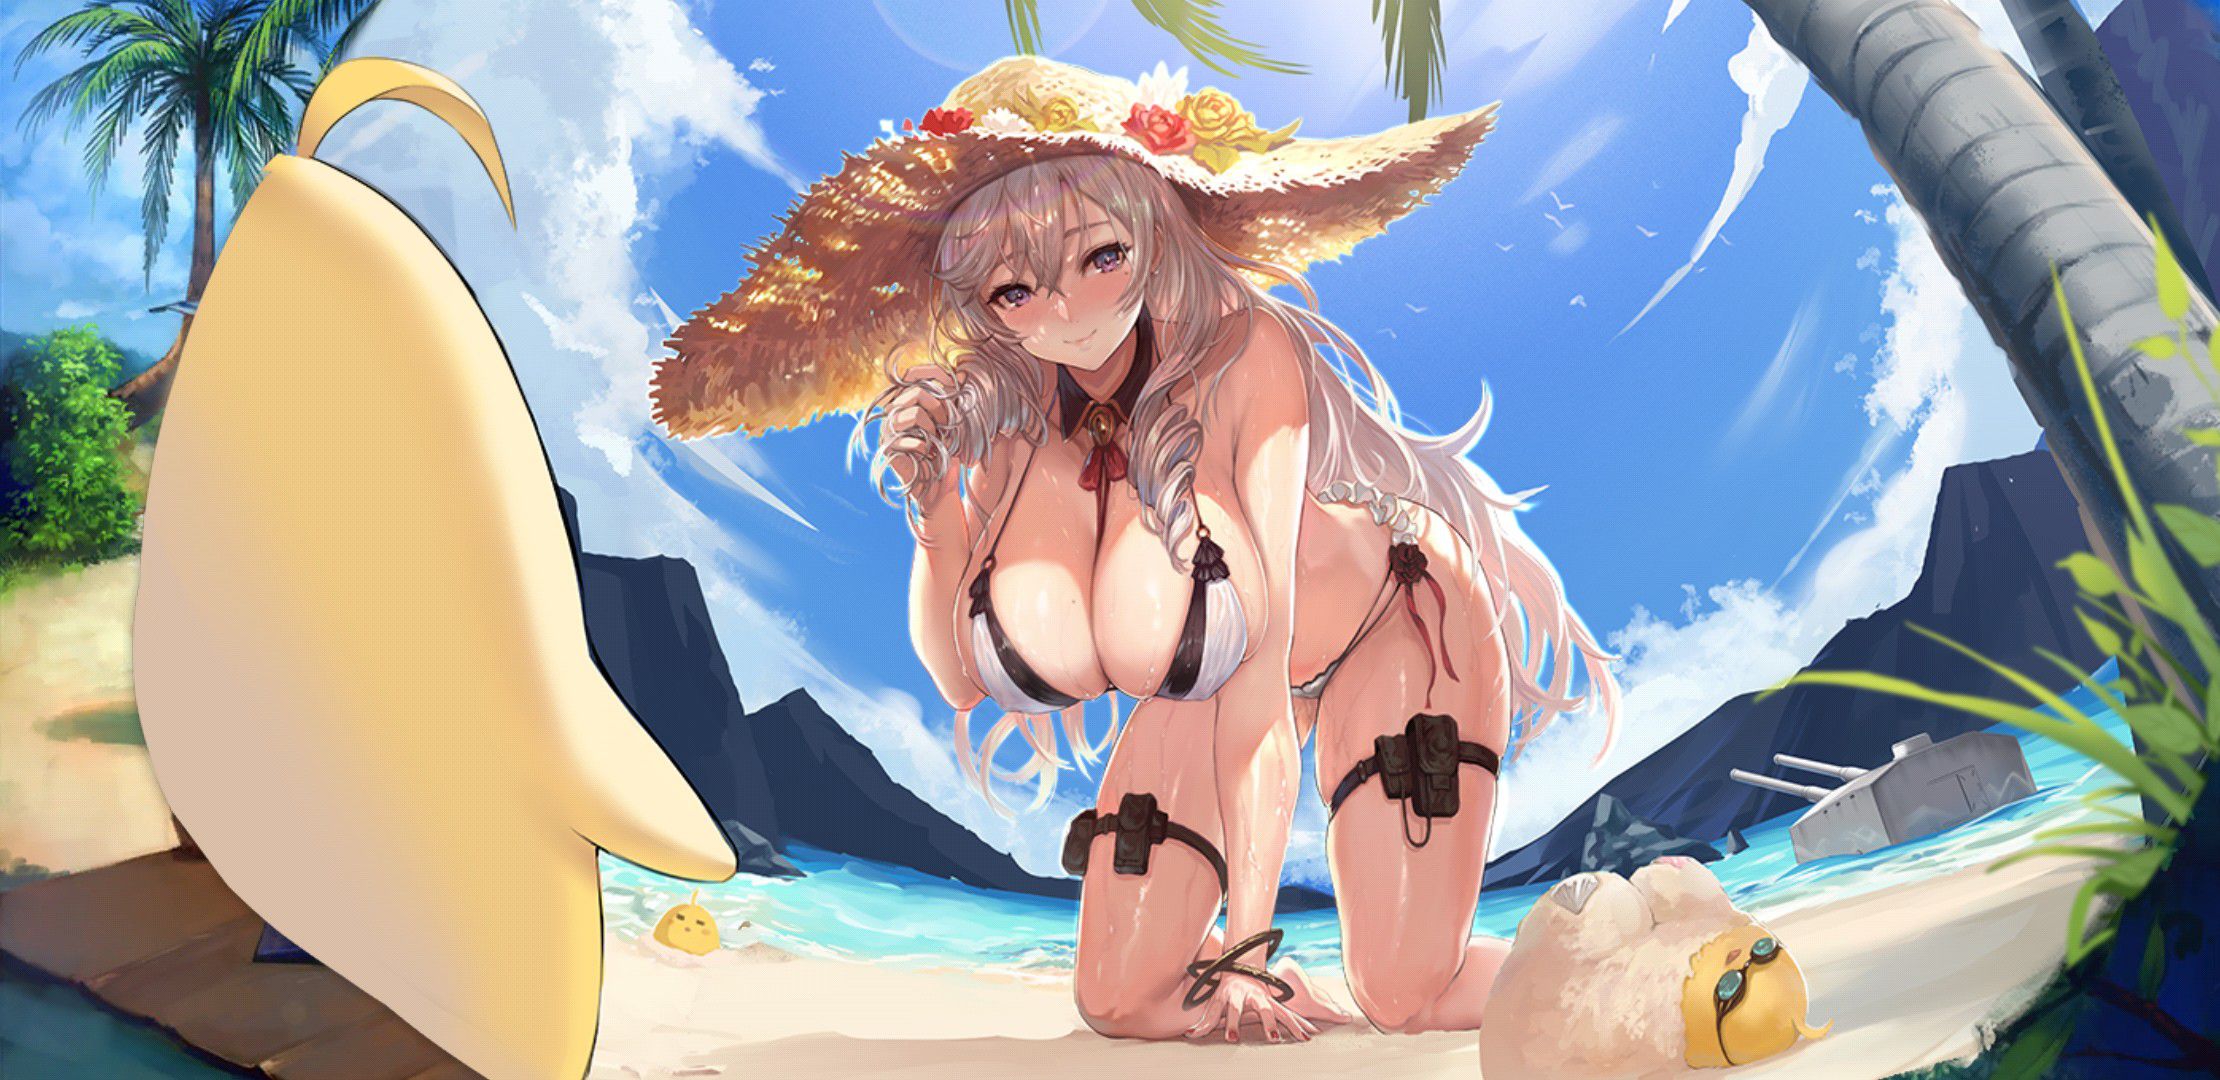 【There is an image】 Smartphone that urges charging with erotic swimsuits is malicious 42